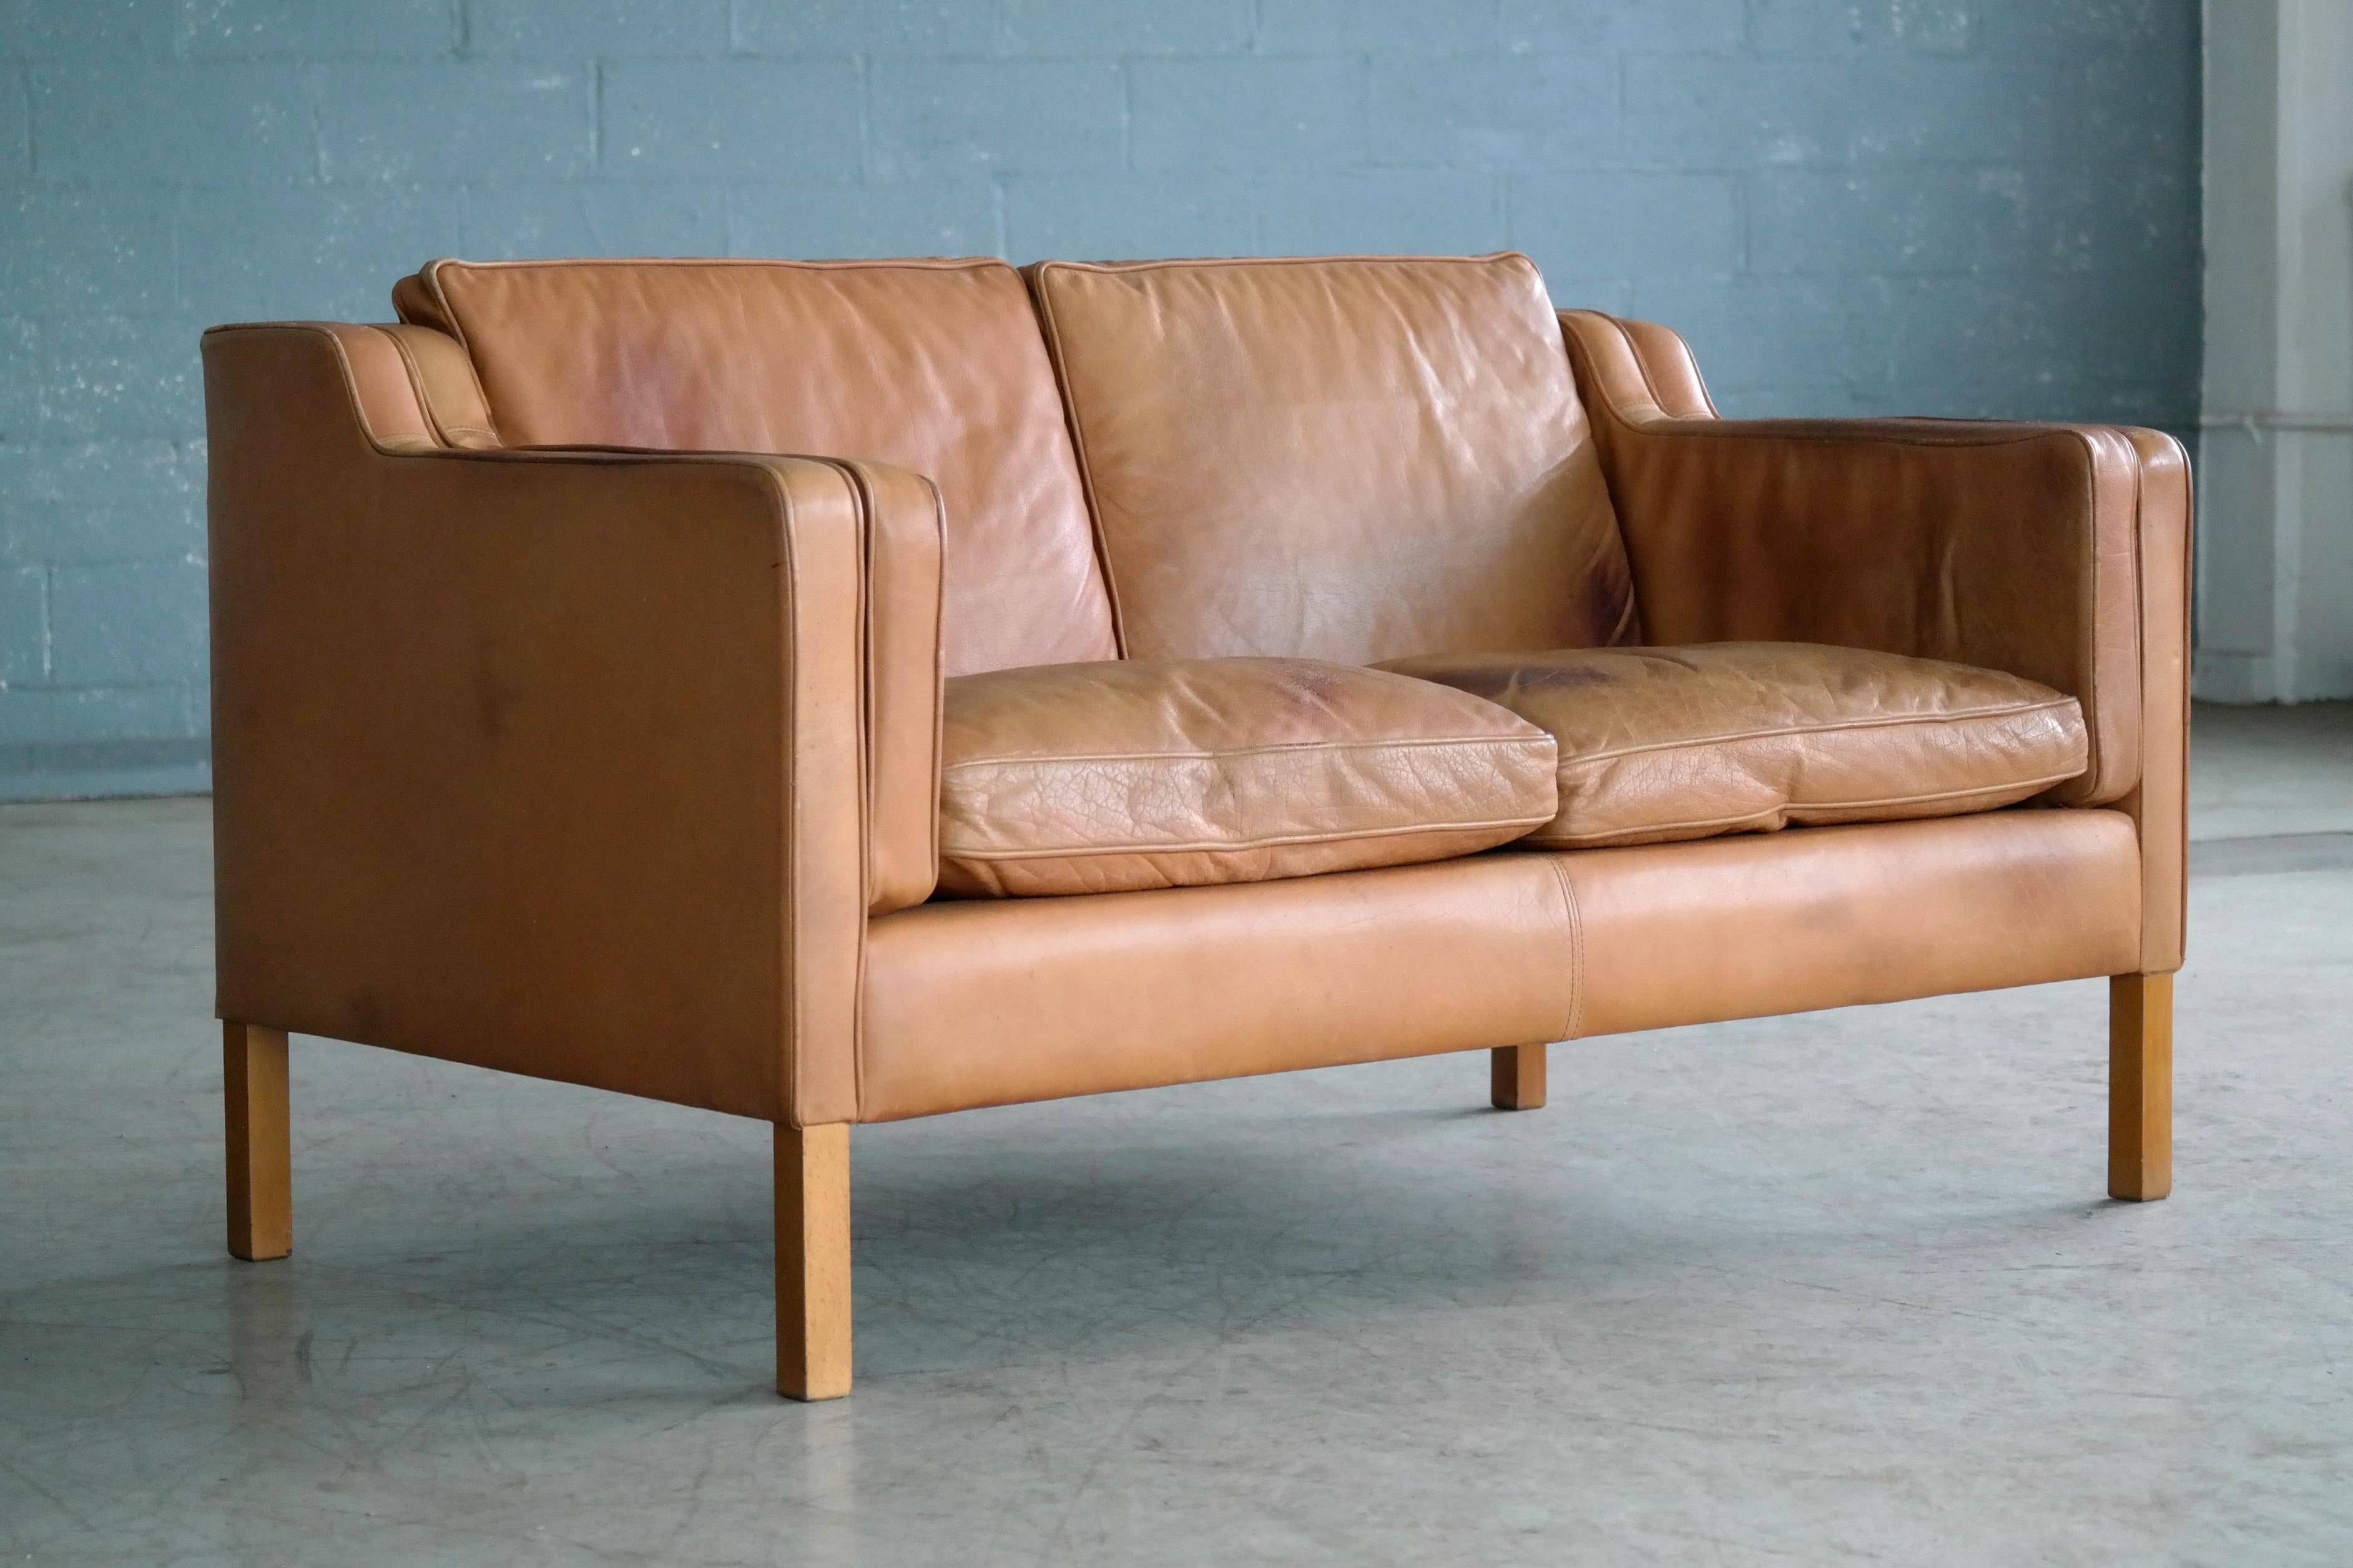 Classic Danish two-seat sofa in the style of Borge Mogensen's model 2212. Executed in supple tan leather by Stouby Mobler raised on beech legs. Mogensen's Classic design has become a staple of modern decor as his sofas set a new standard for